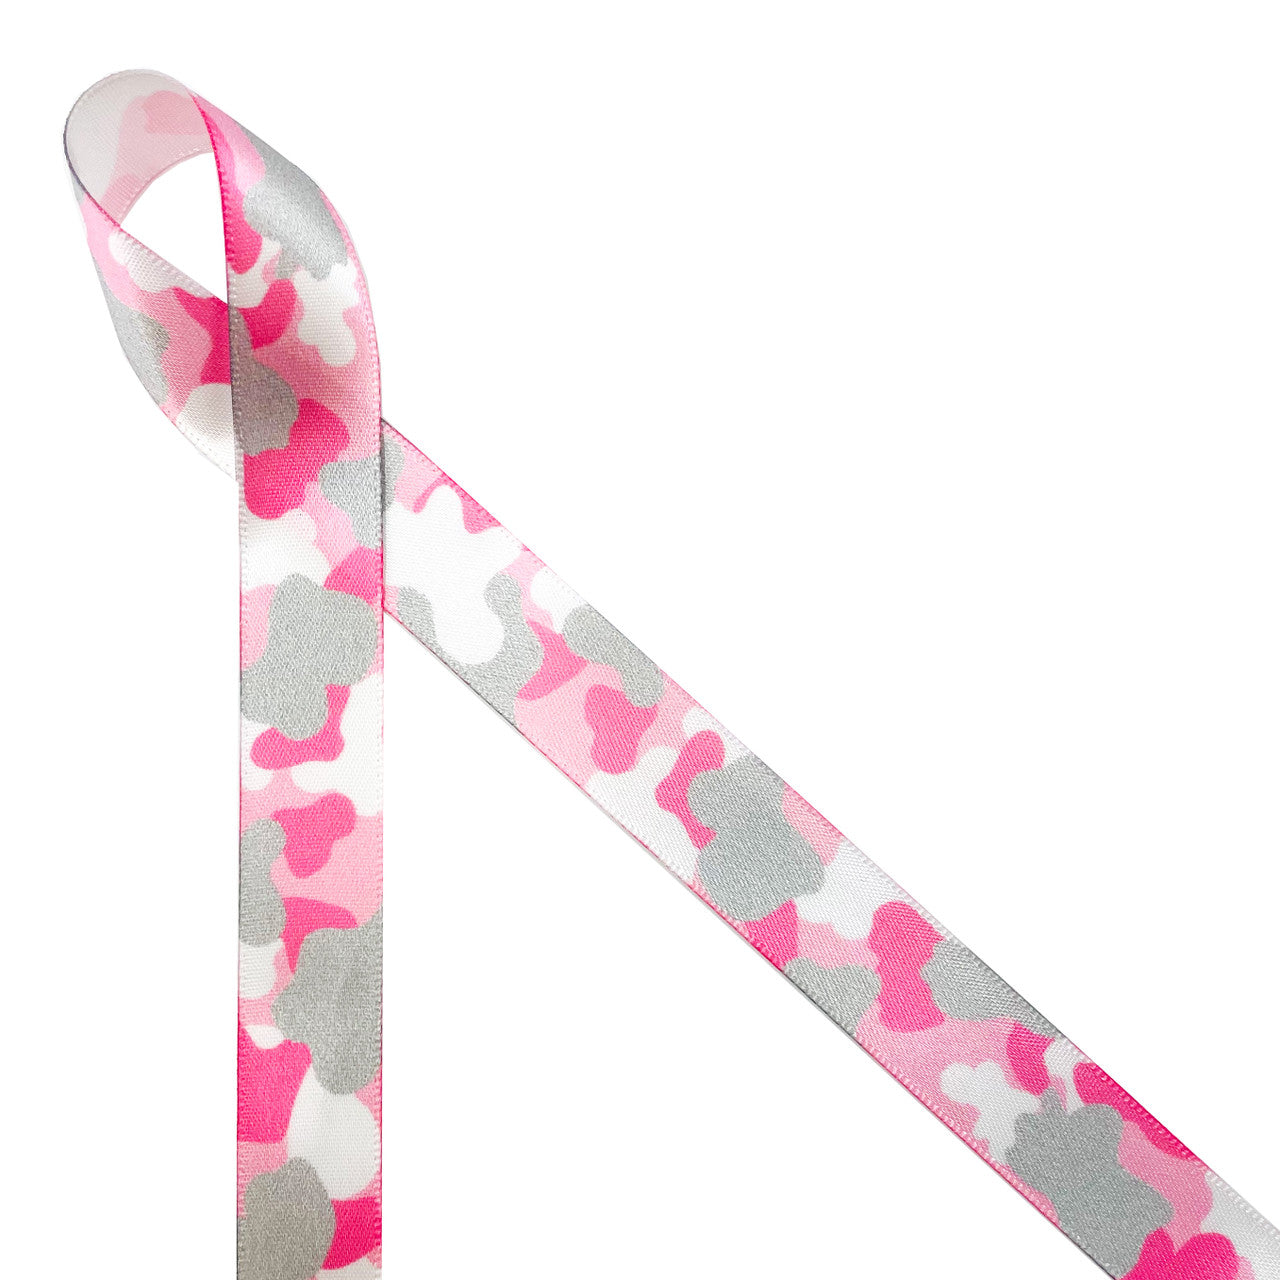 Pink and gray camouflage print on 5/8" white single face satin ribbon will add an element of fun to any girl baby gift! Designed and printed in the USA